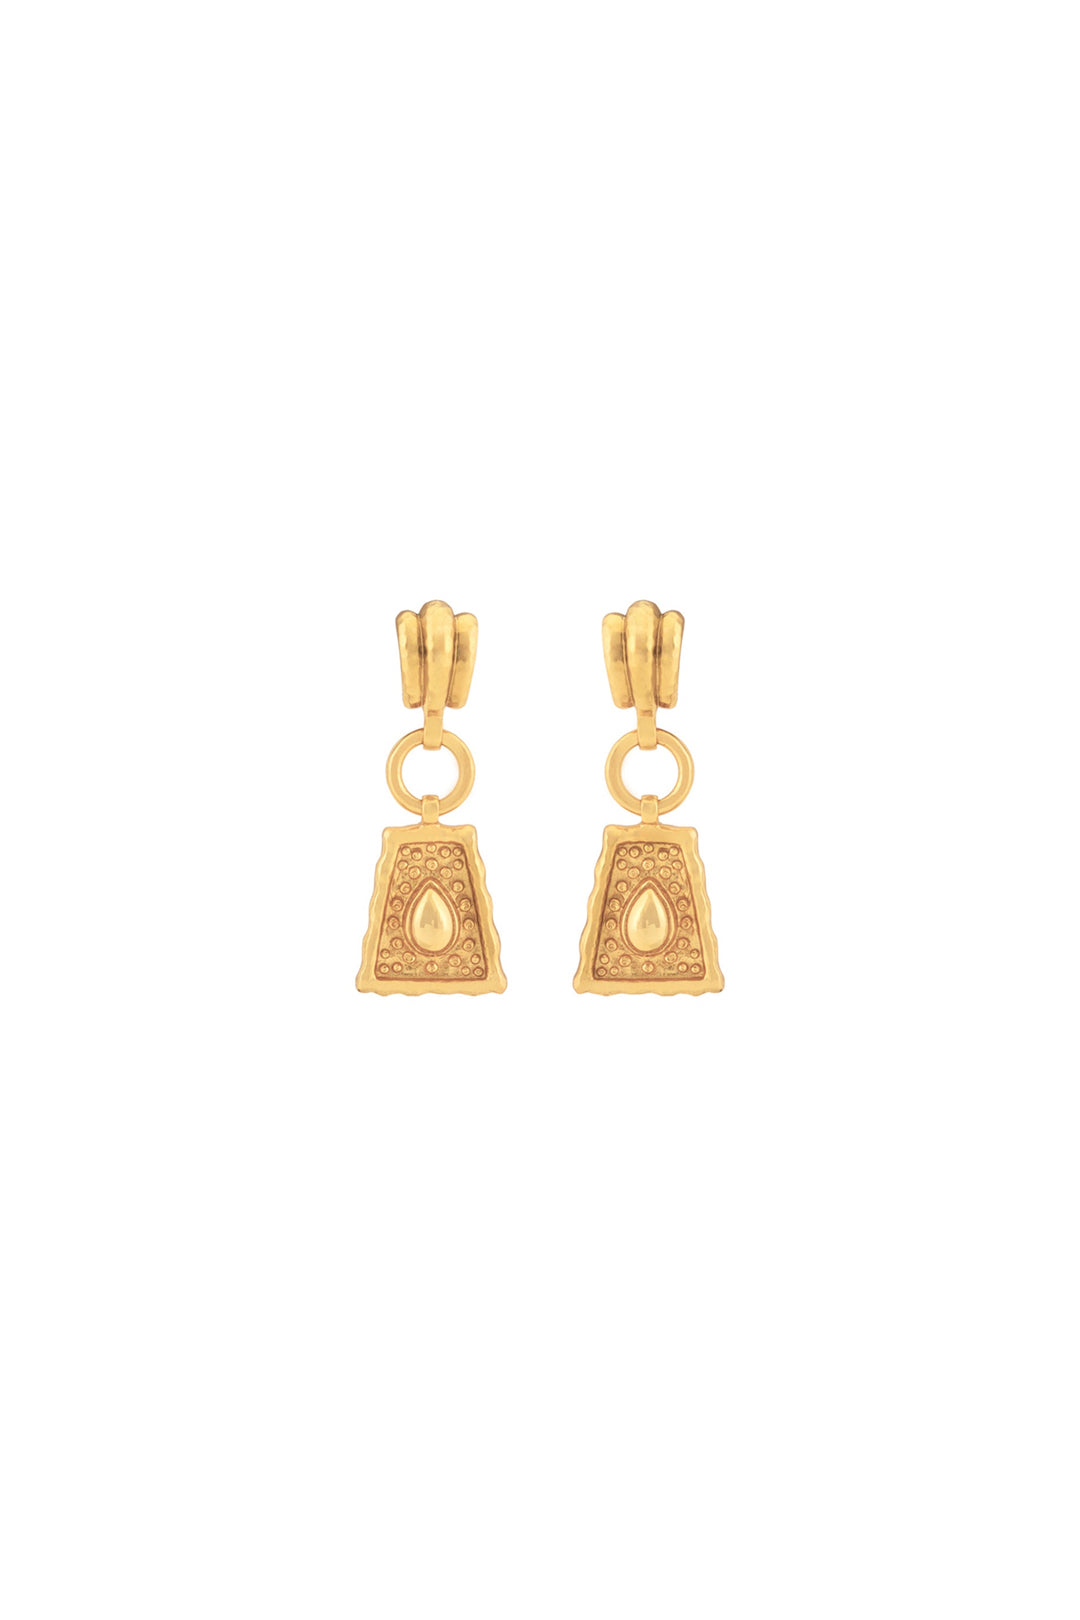 Valere Mayan Earring - Gold